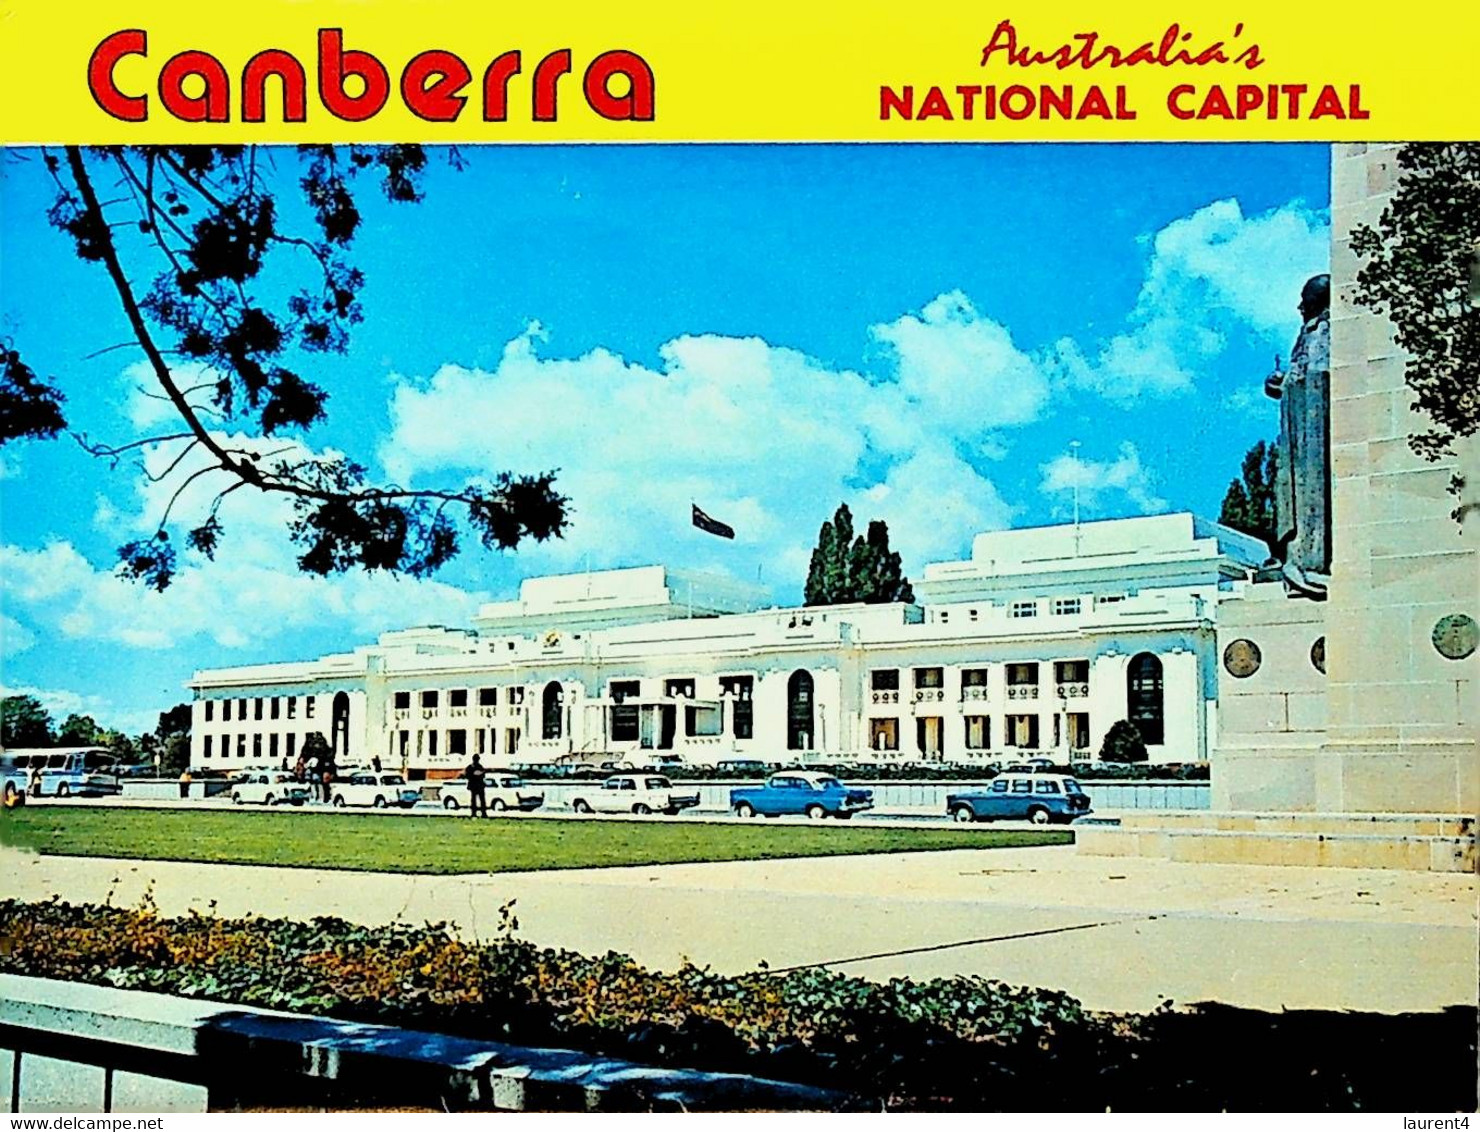 (Booklet 125) Australia - ACT - Canberra (older) - Canberra (ACT)